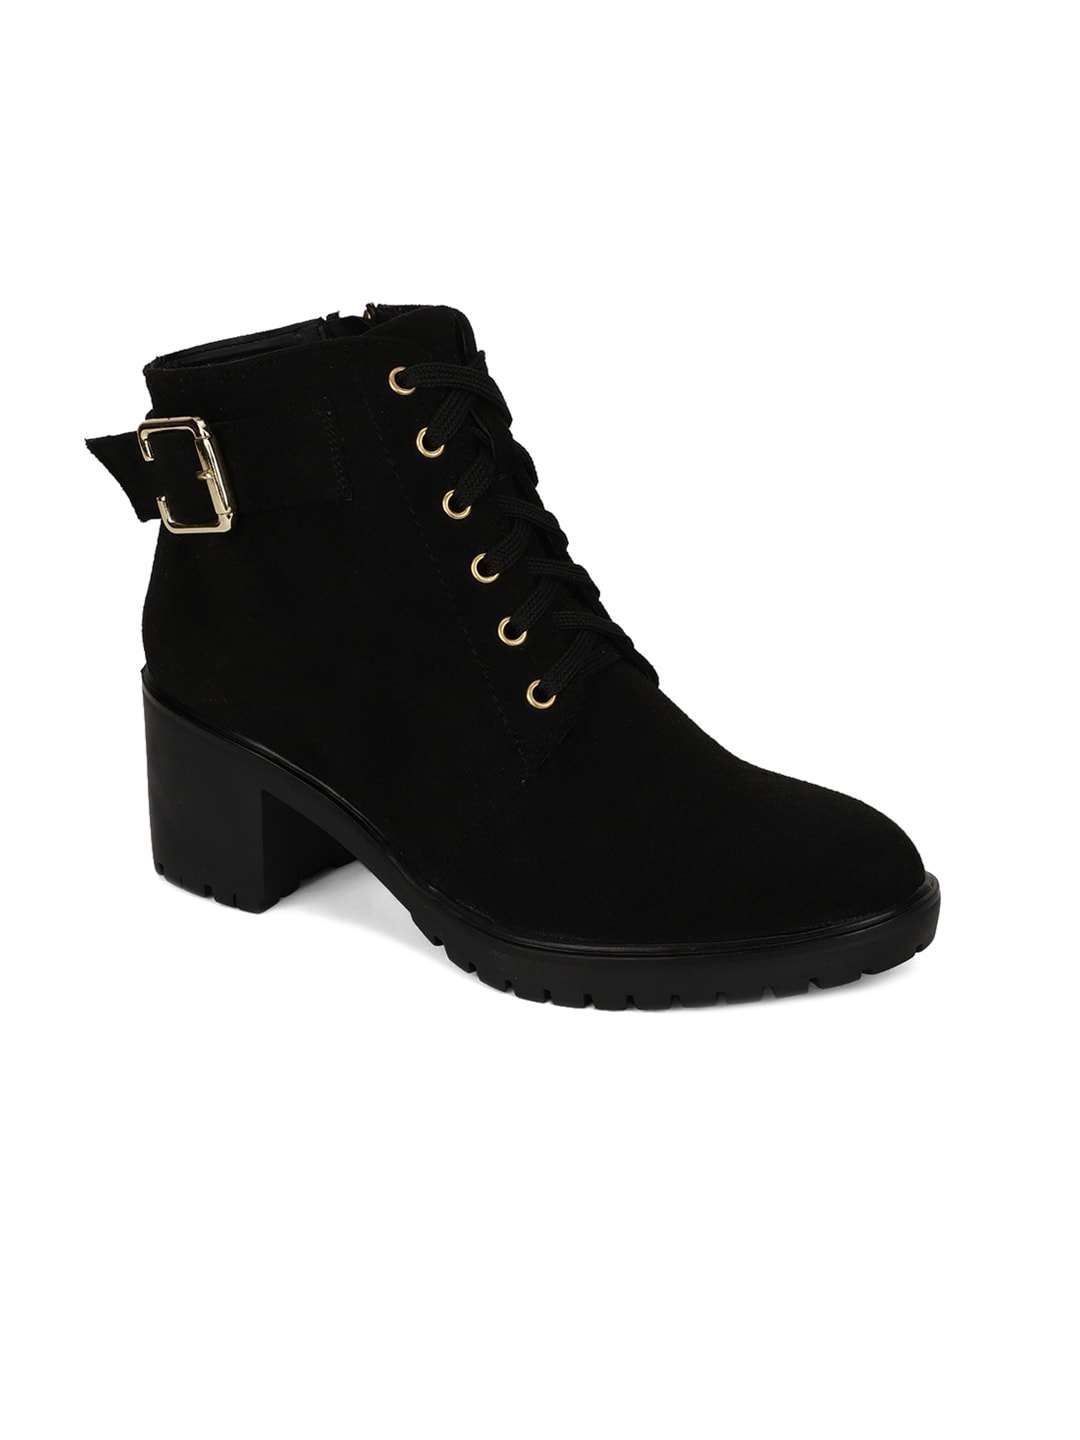 Bruno Manetti Black Suede Block Heeled Boots with Buckles Price in India